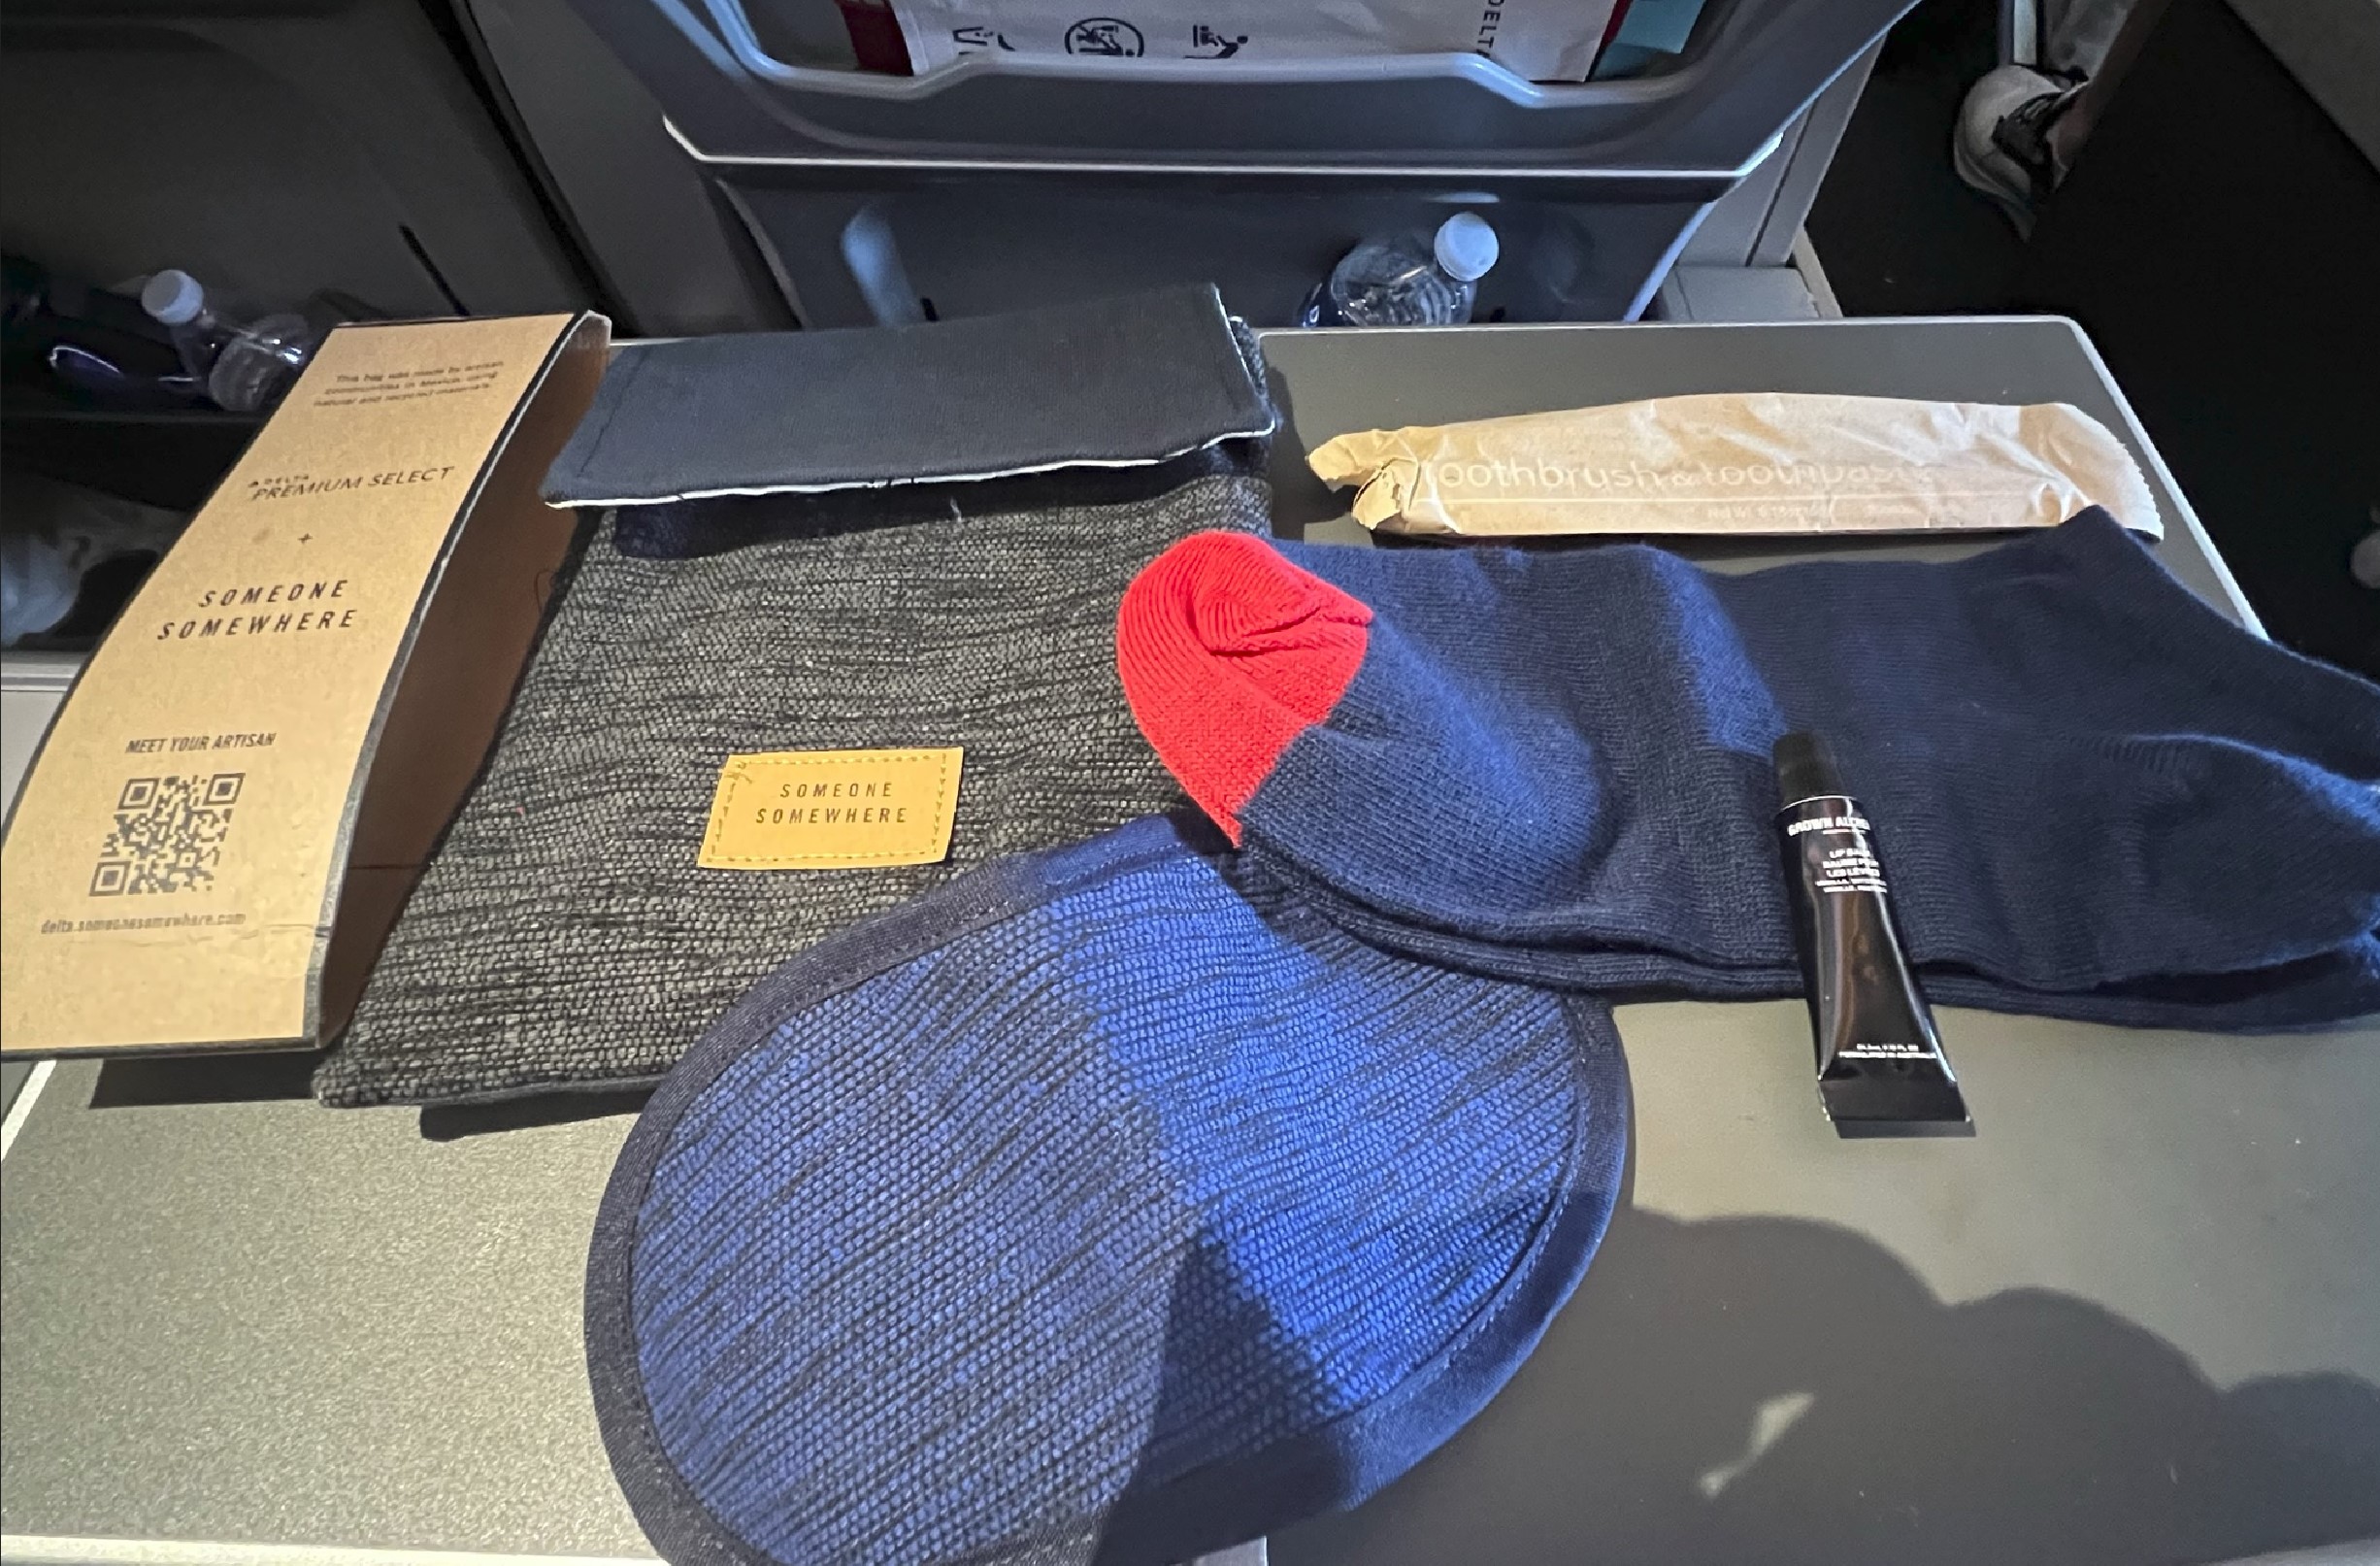 Delta Premium Select Review (A350-900 DTW-HND): Is it Worth it?